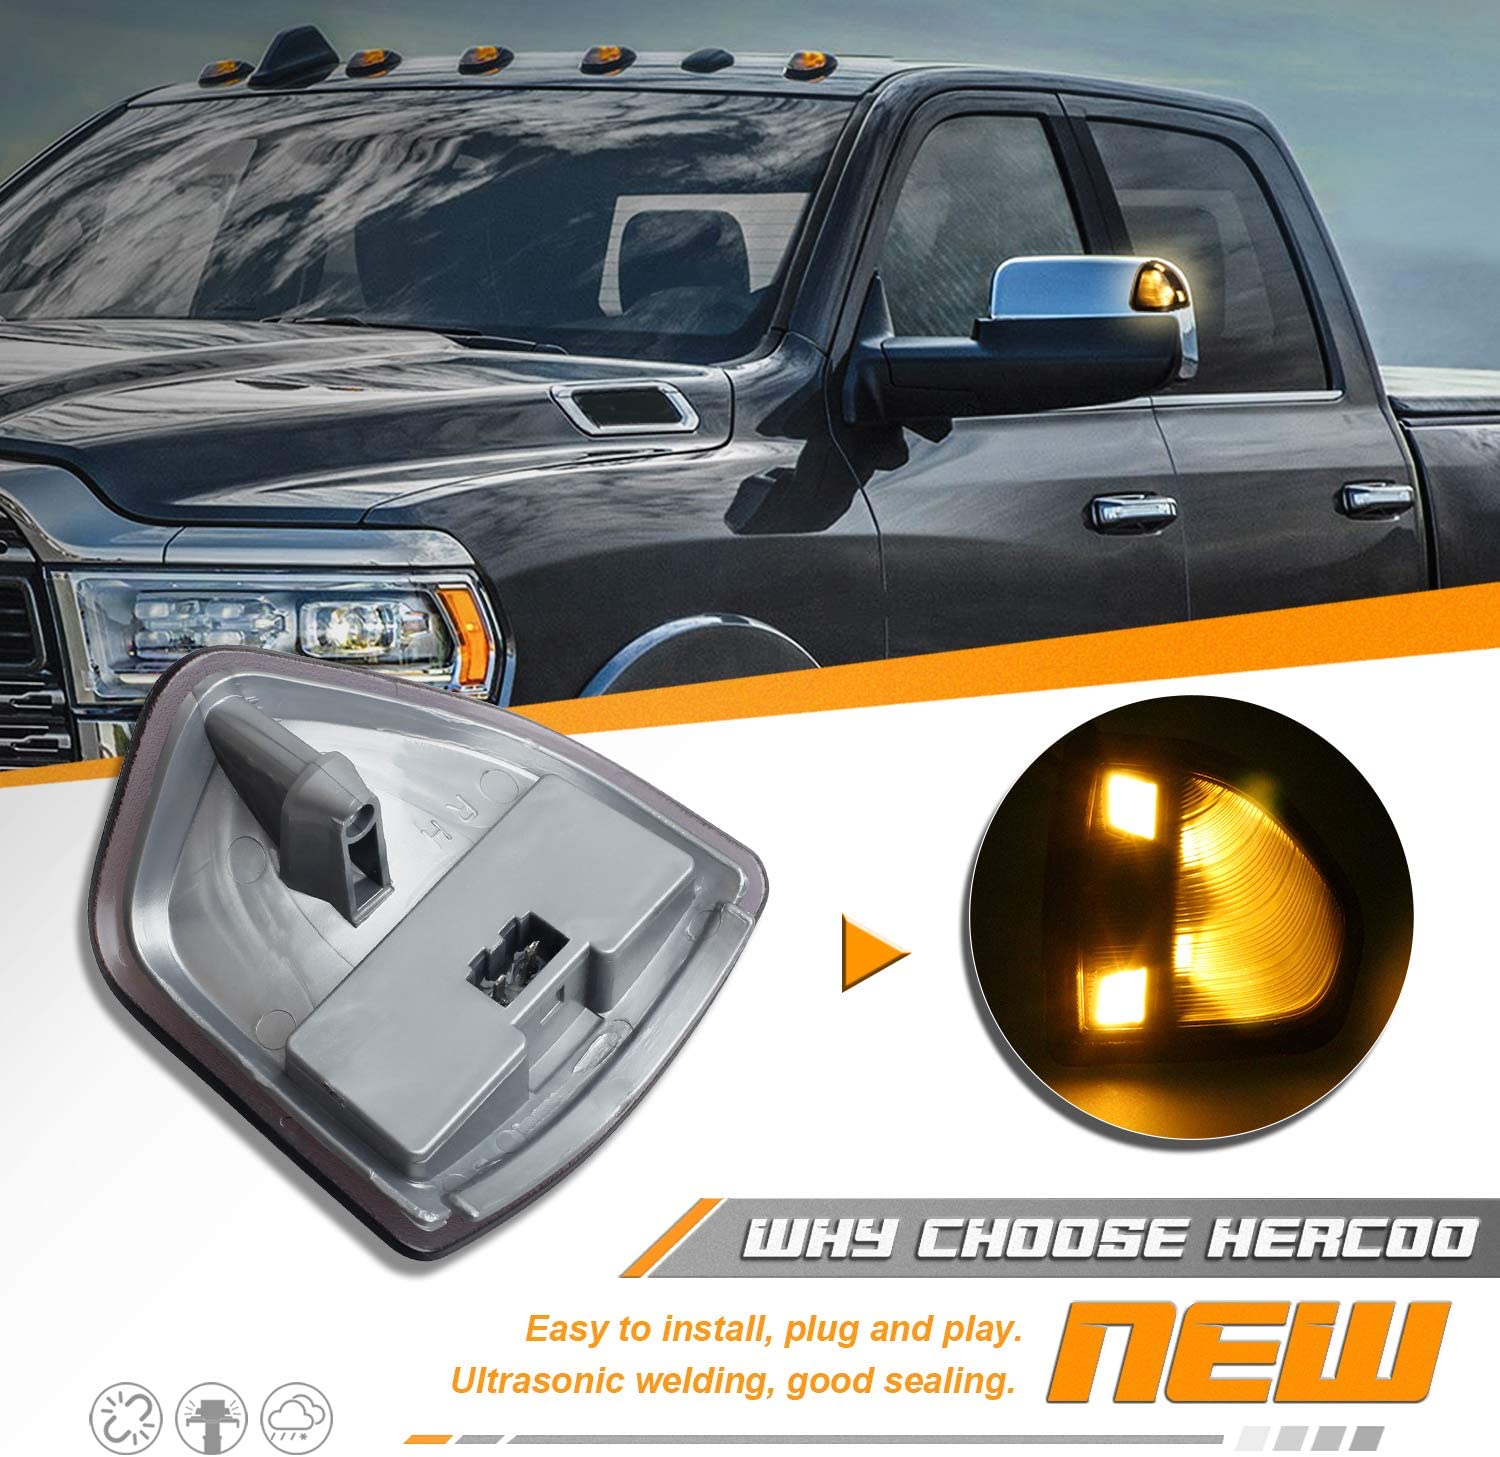 HERCOO LED Side Mirror Turn Signal Light Left and Right Lamps Clear Cover Lens for 68302828AA 68302829AA Compatible with 2010-2018 Dodge Ram 1500 2500 3500 4500 5500, Pack of 2